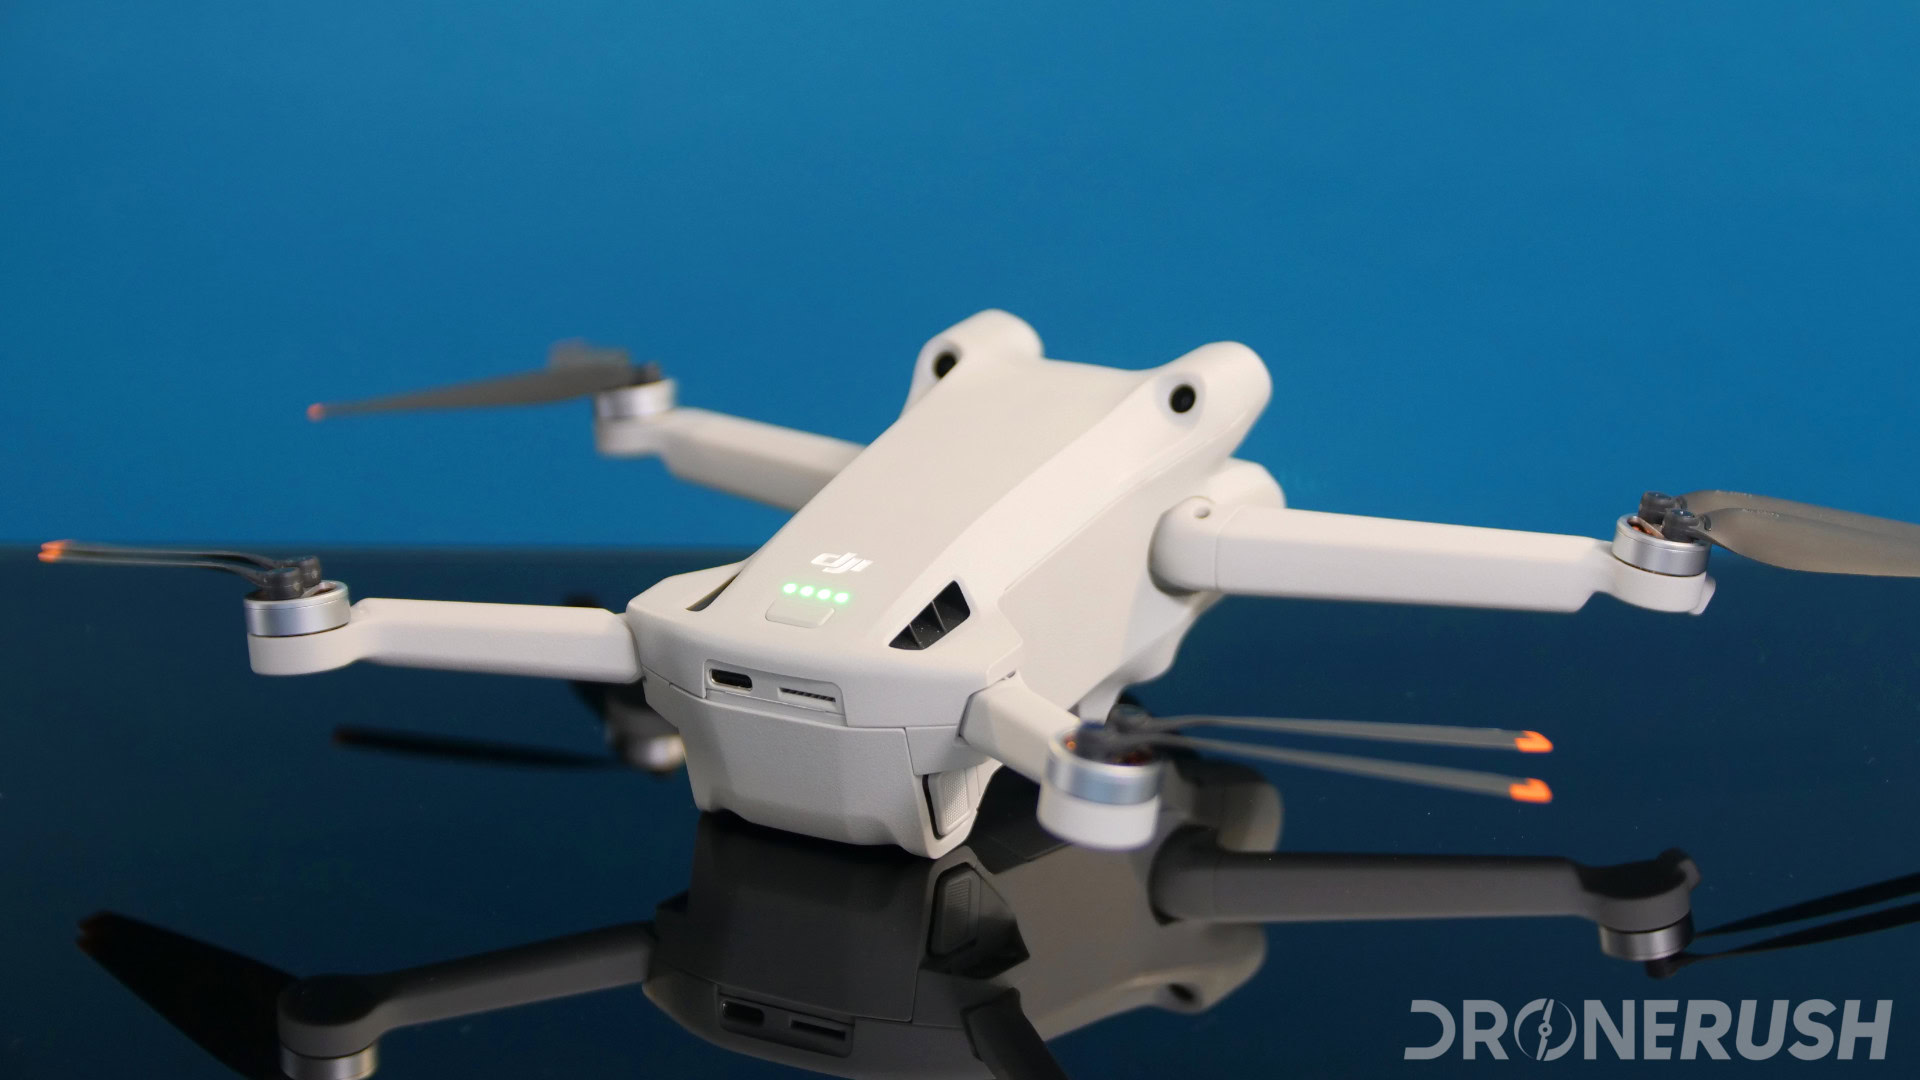 DJI unveils its new Mini 3 Pro drone with 4K/60 video, 48MP stills,  obstacle avoidance sensors and more: Digital Photography Review